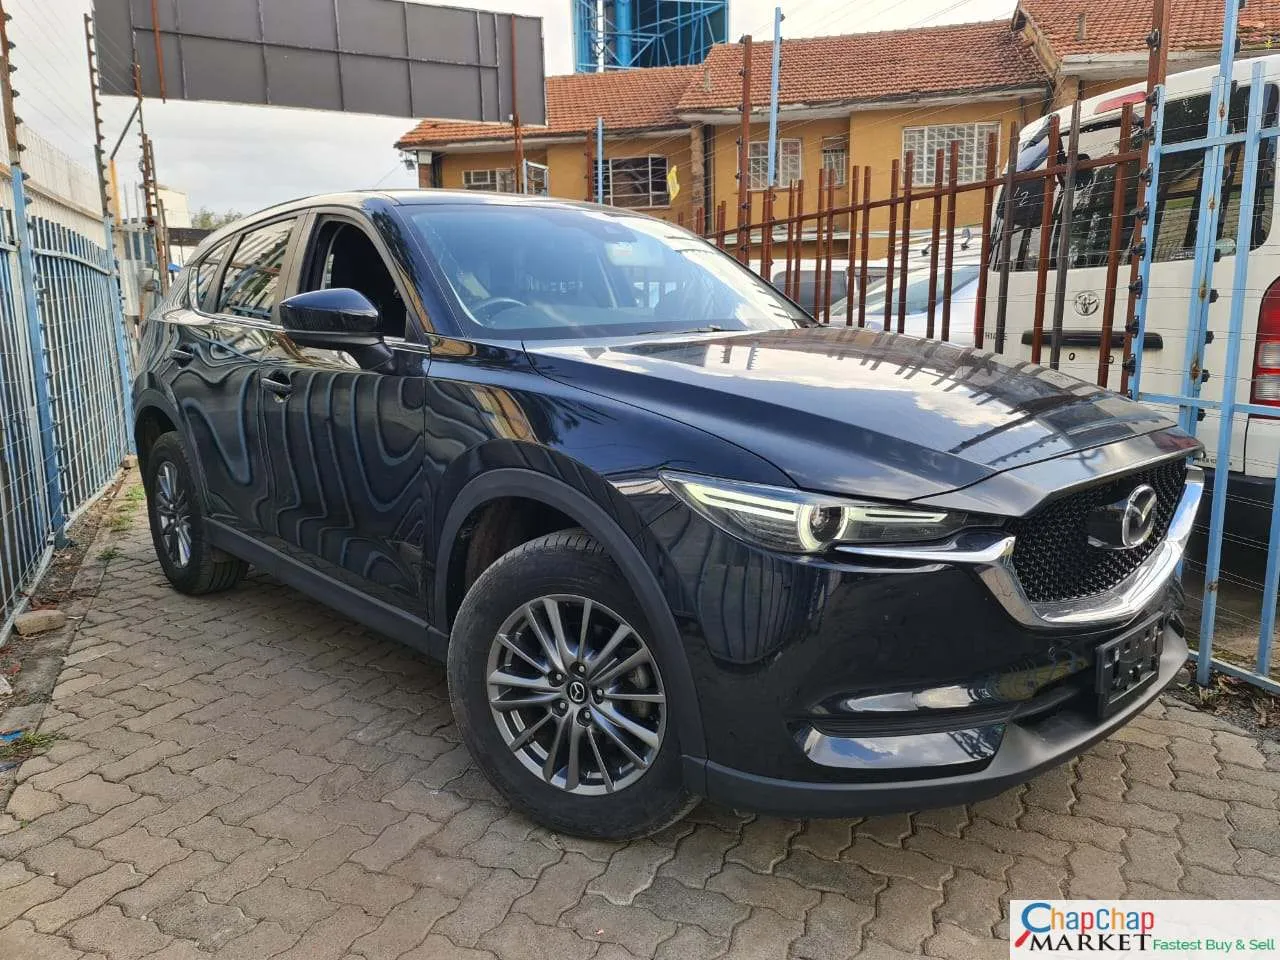 Cars Cars For Sale/Vehicles-Mazda CX5 LATEST PETROL 🔥 You Pay 30% DEPOSIT TRADE IN OK EXCLUSIVE CX-5 cx 5 9